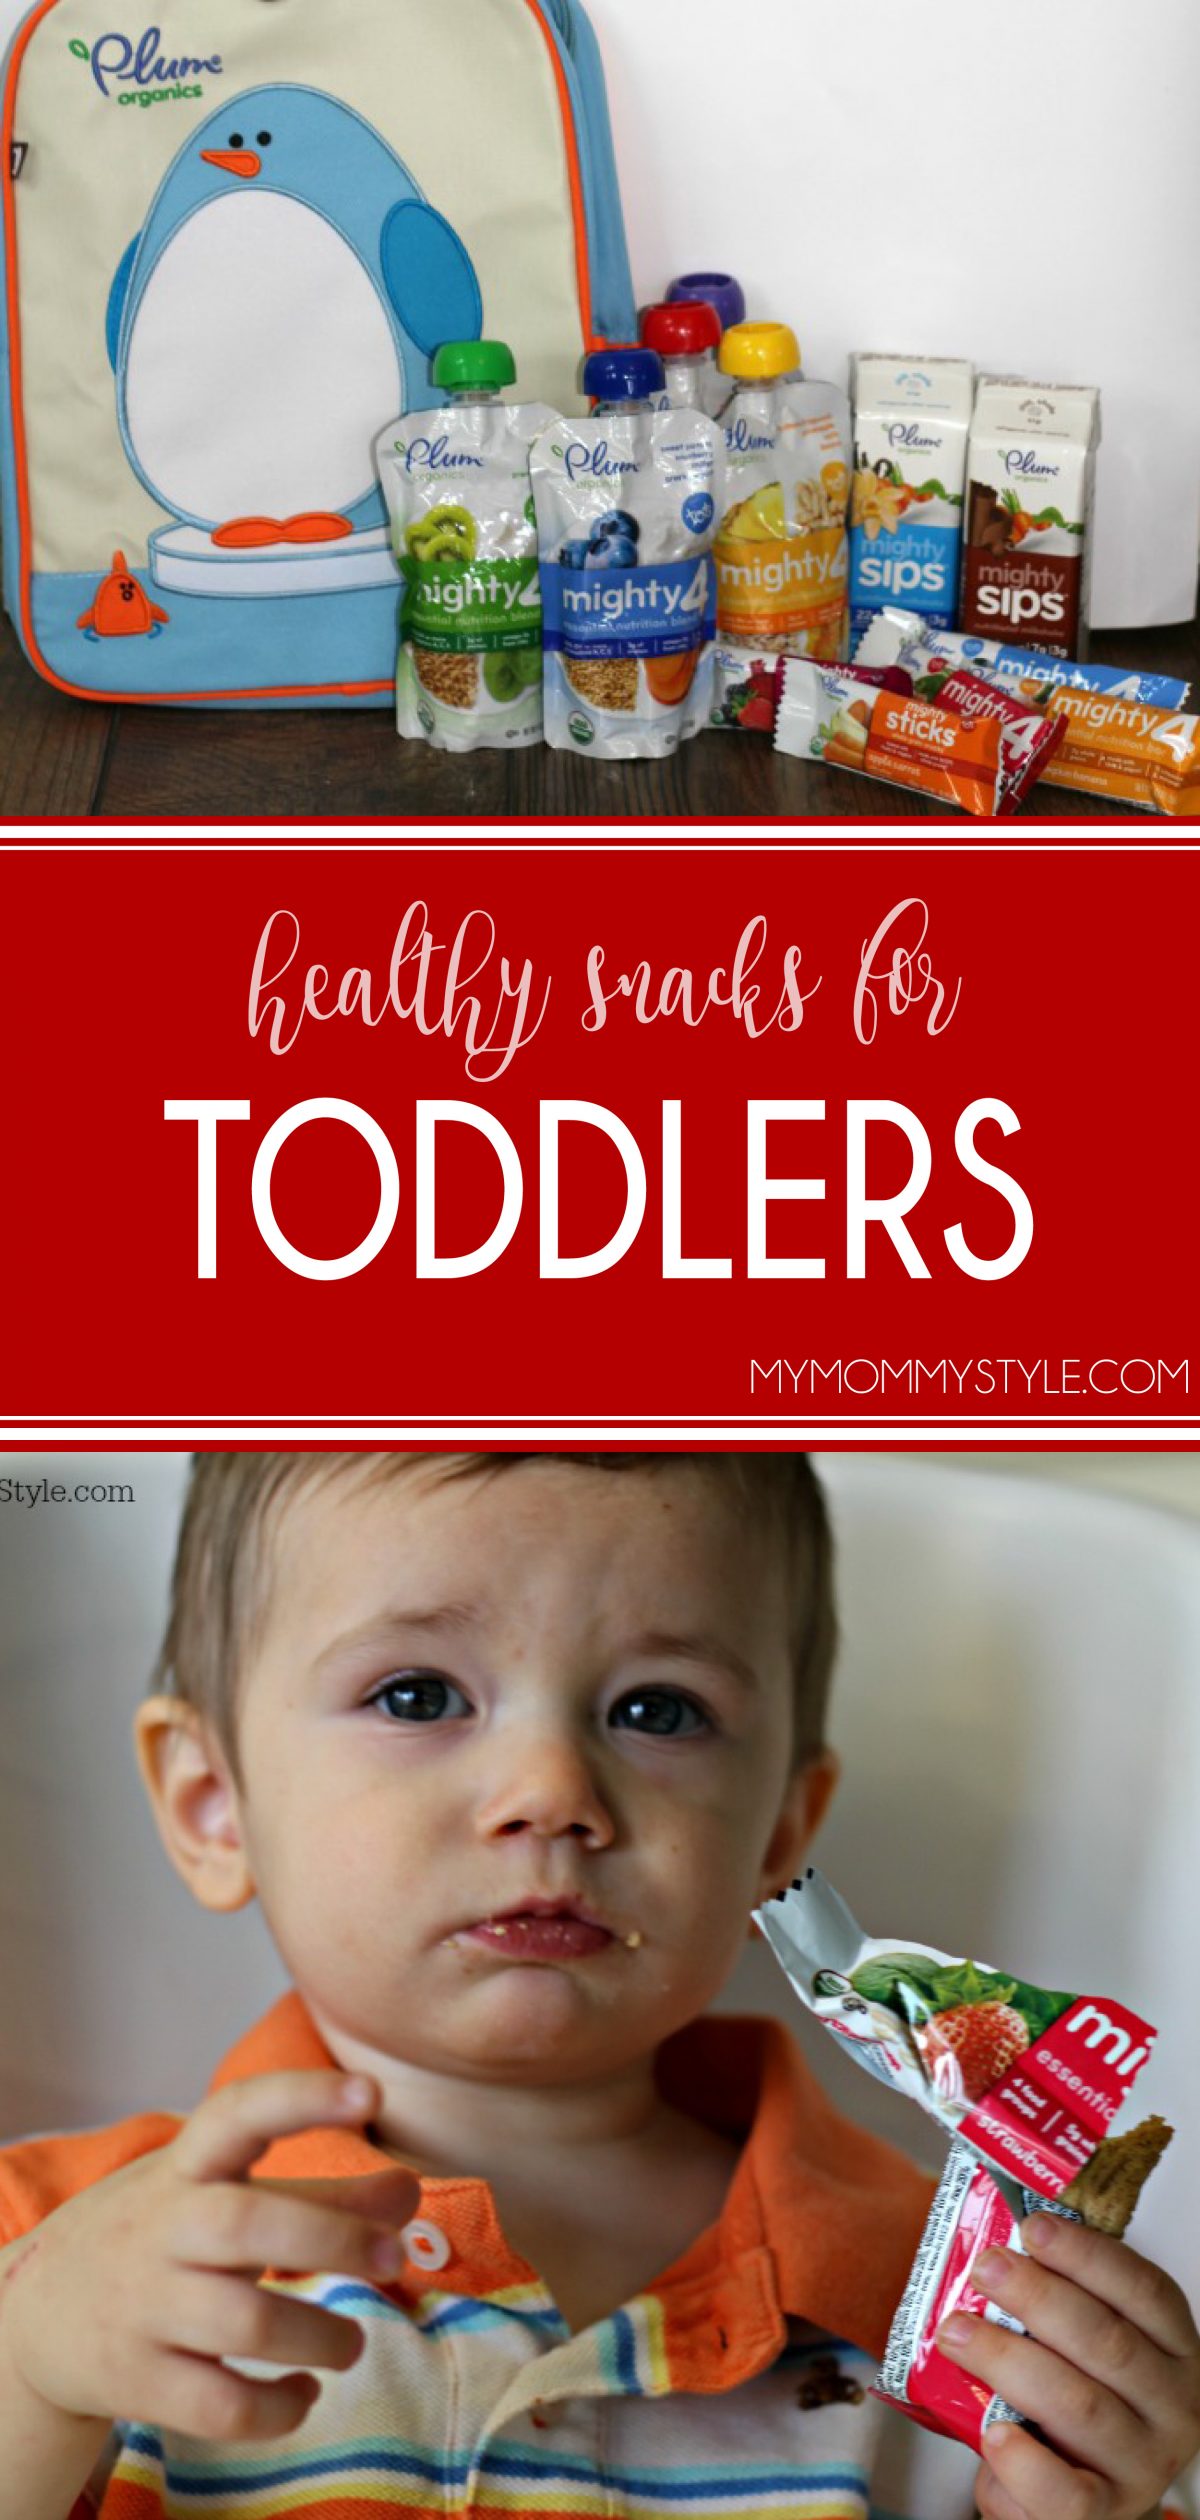 Healthy snacks for toddlers can be hard to find especially when on the go. This list of snacks will help you give your toddler the nutrition he/she needs! via @mymommystyle